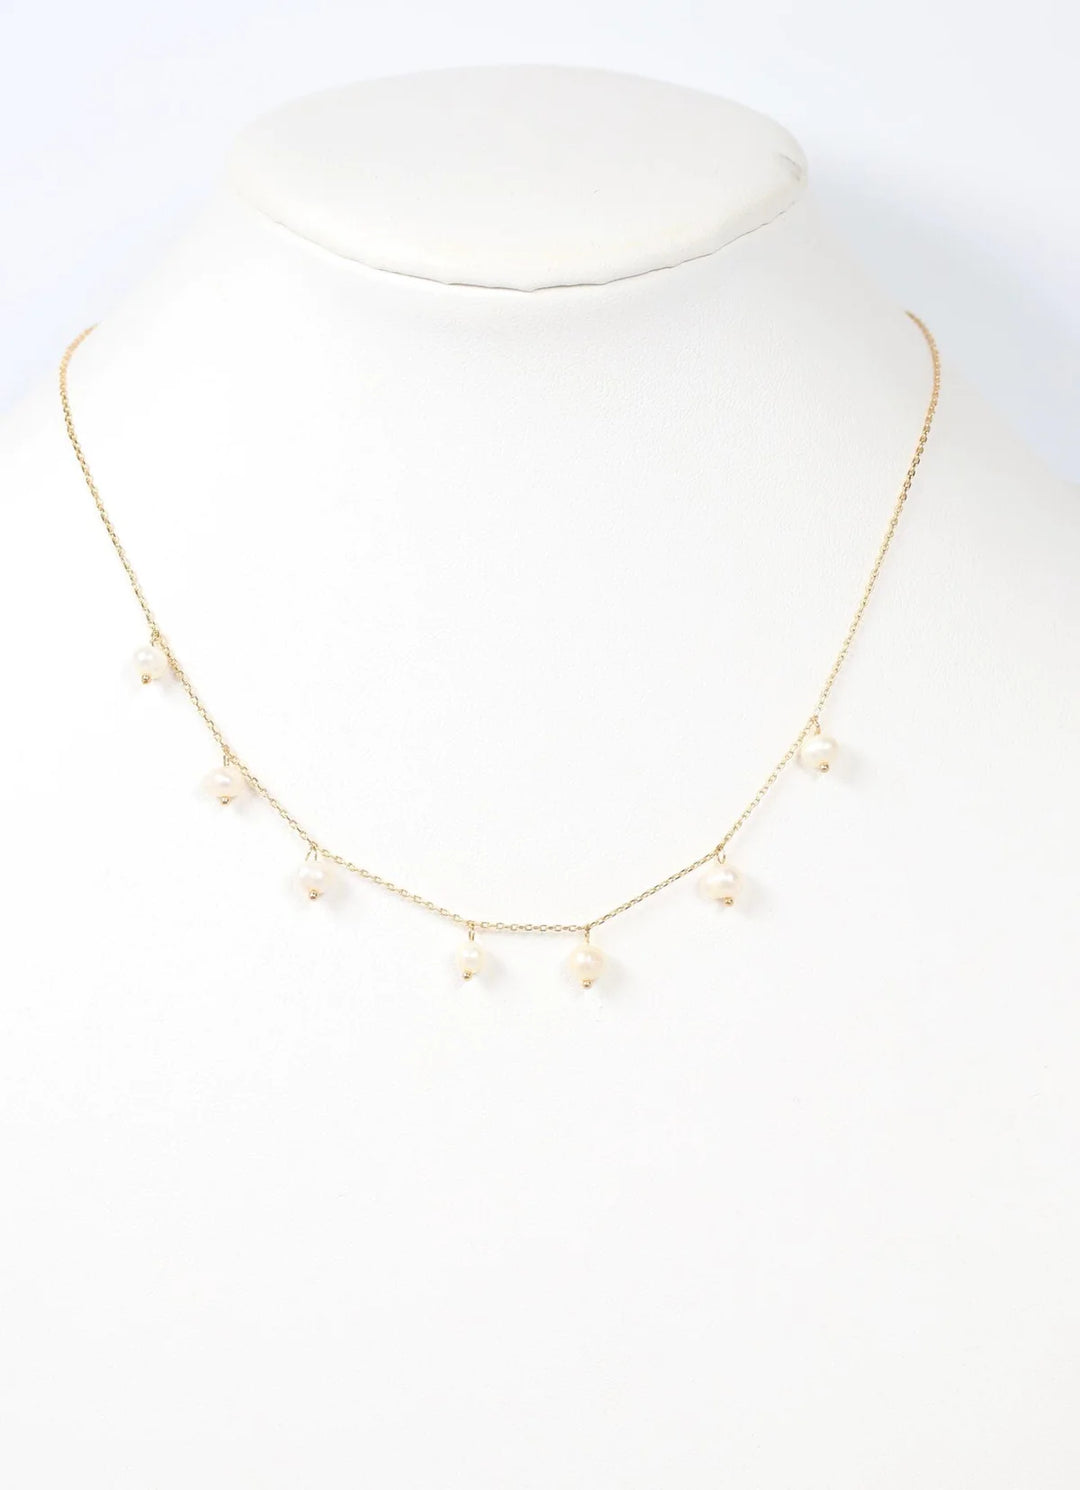 Polly Pearl Necklace in Gold